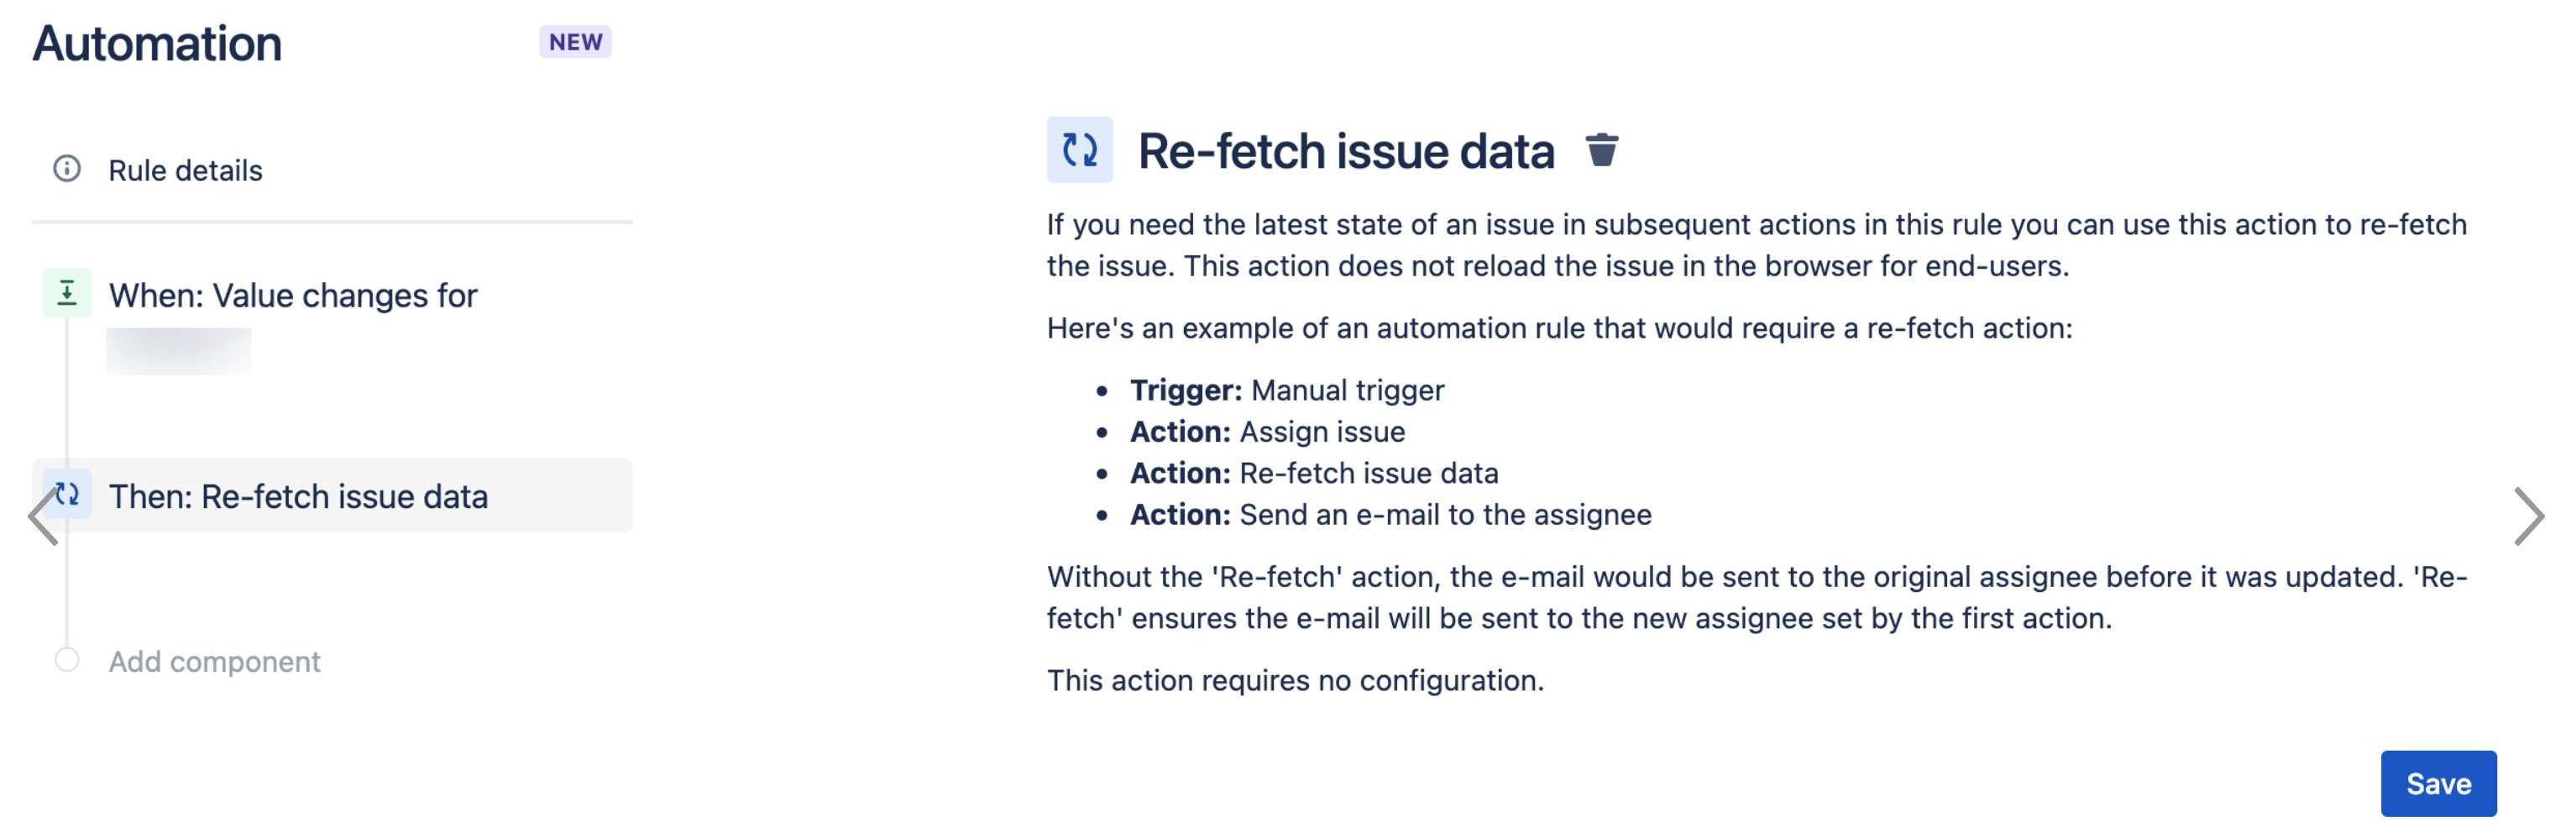 Re-fetch component in Jira automation